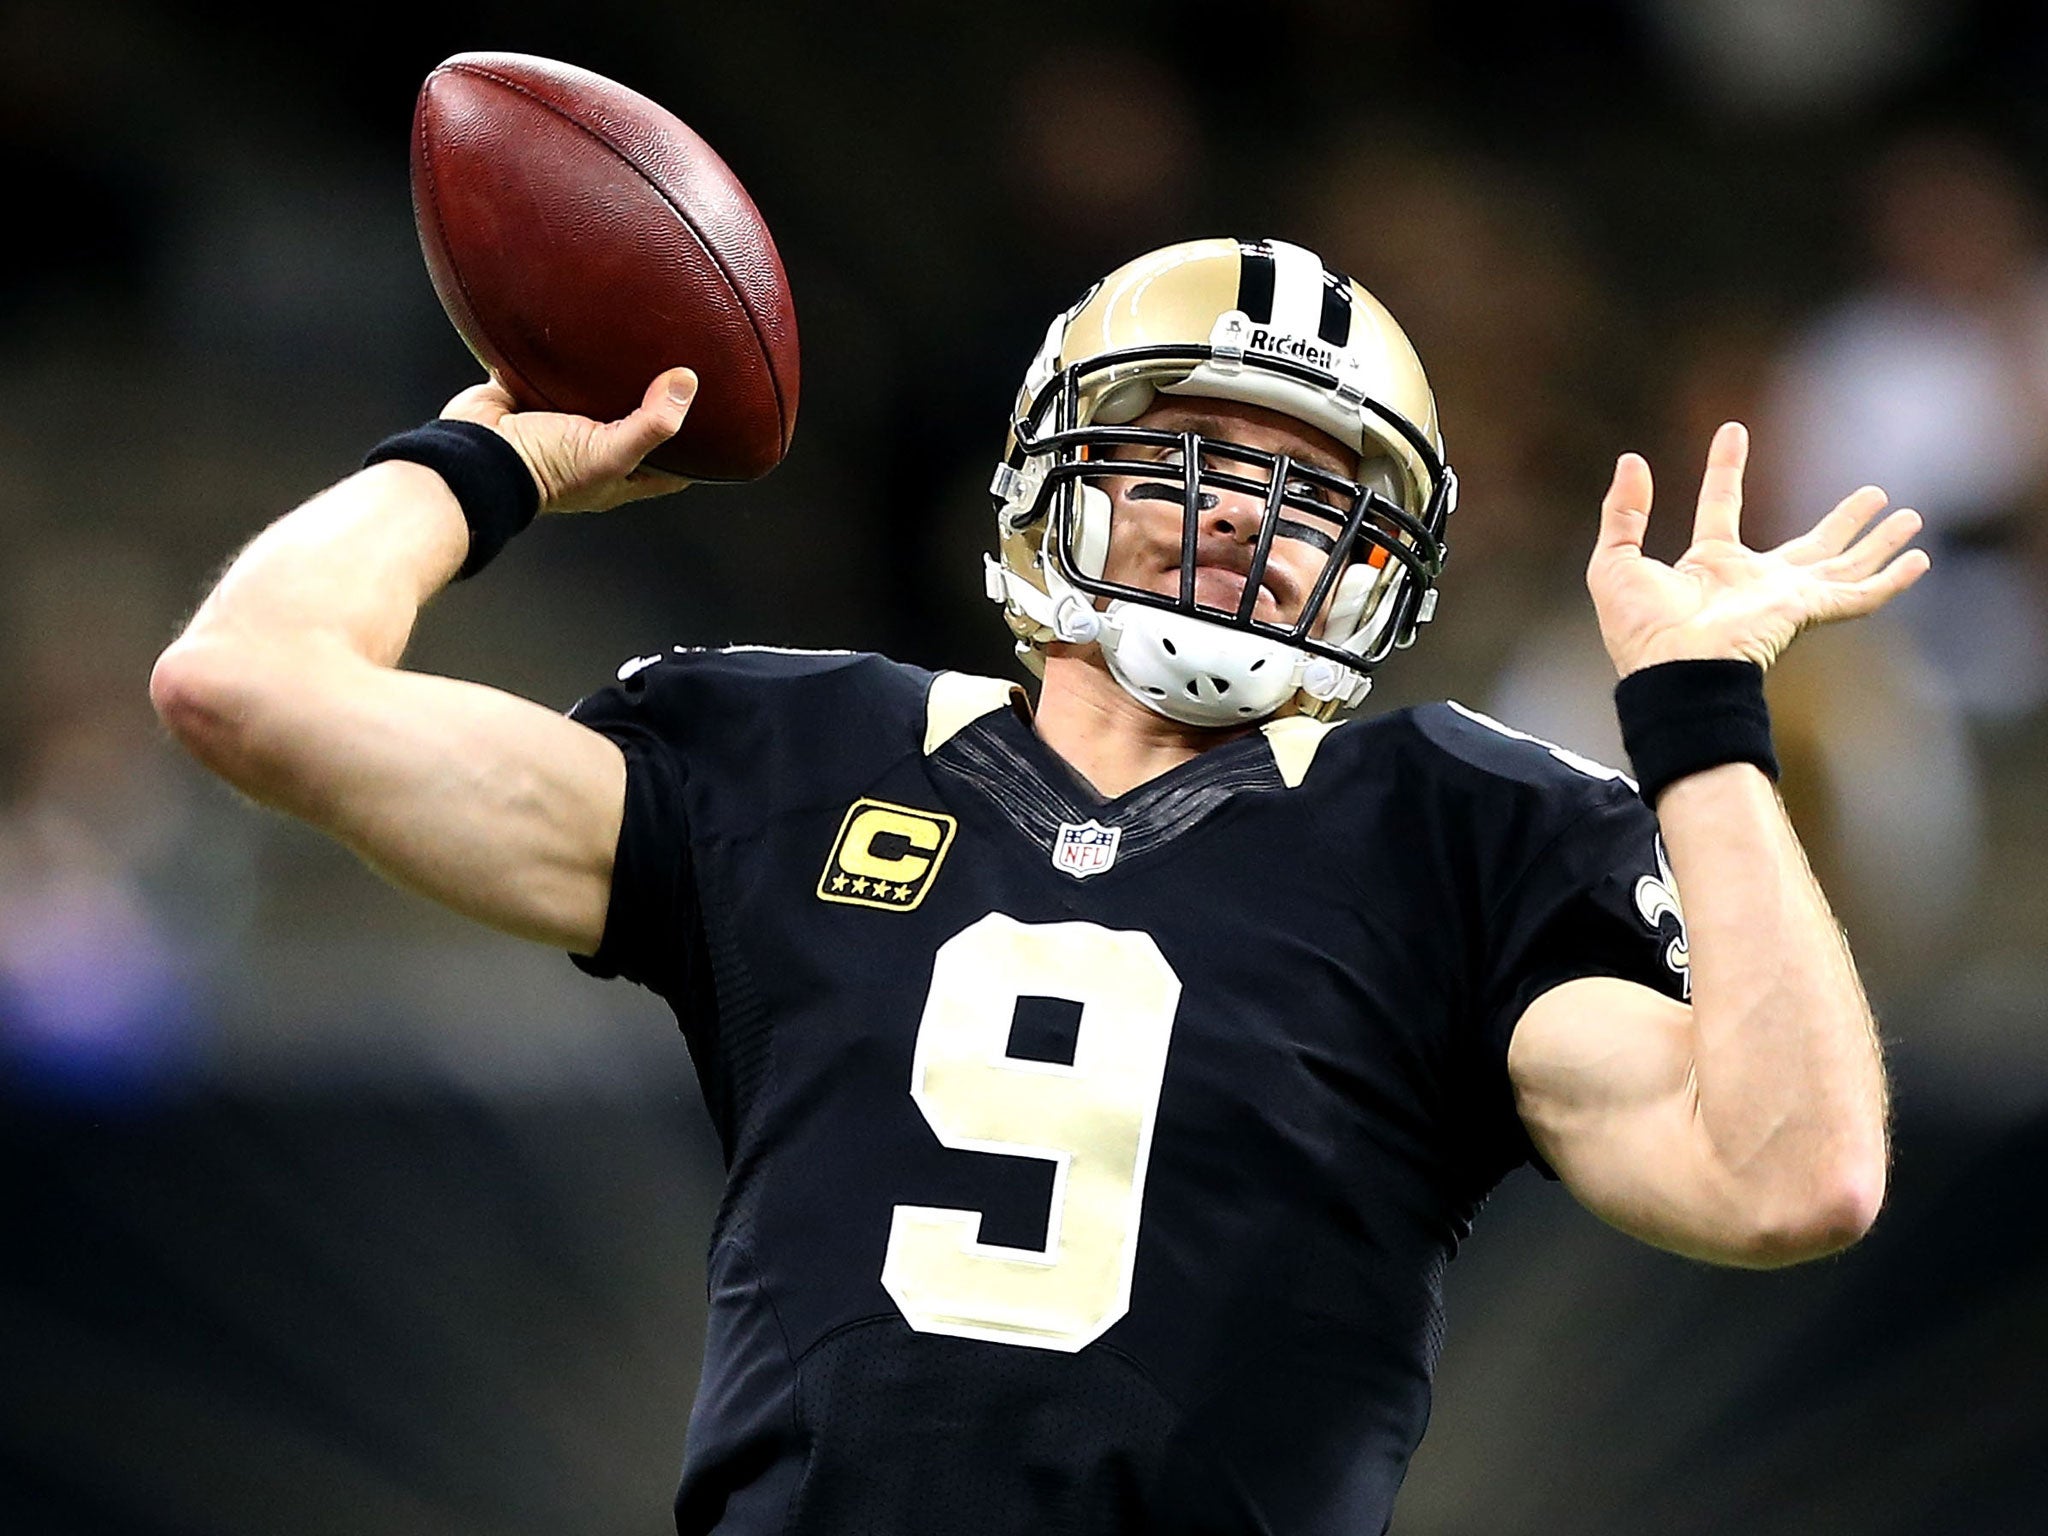 New Orleans' star quarterback Drew Brees travels to Philadelphia with his team this weekend